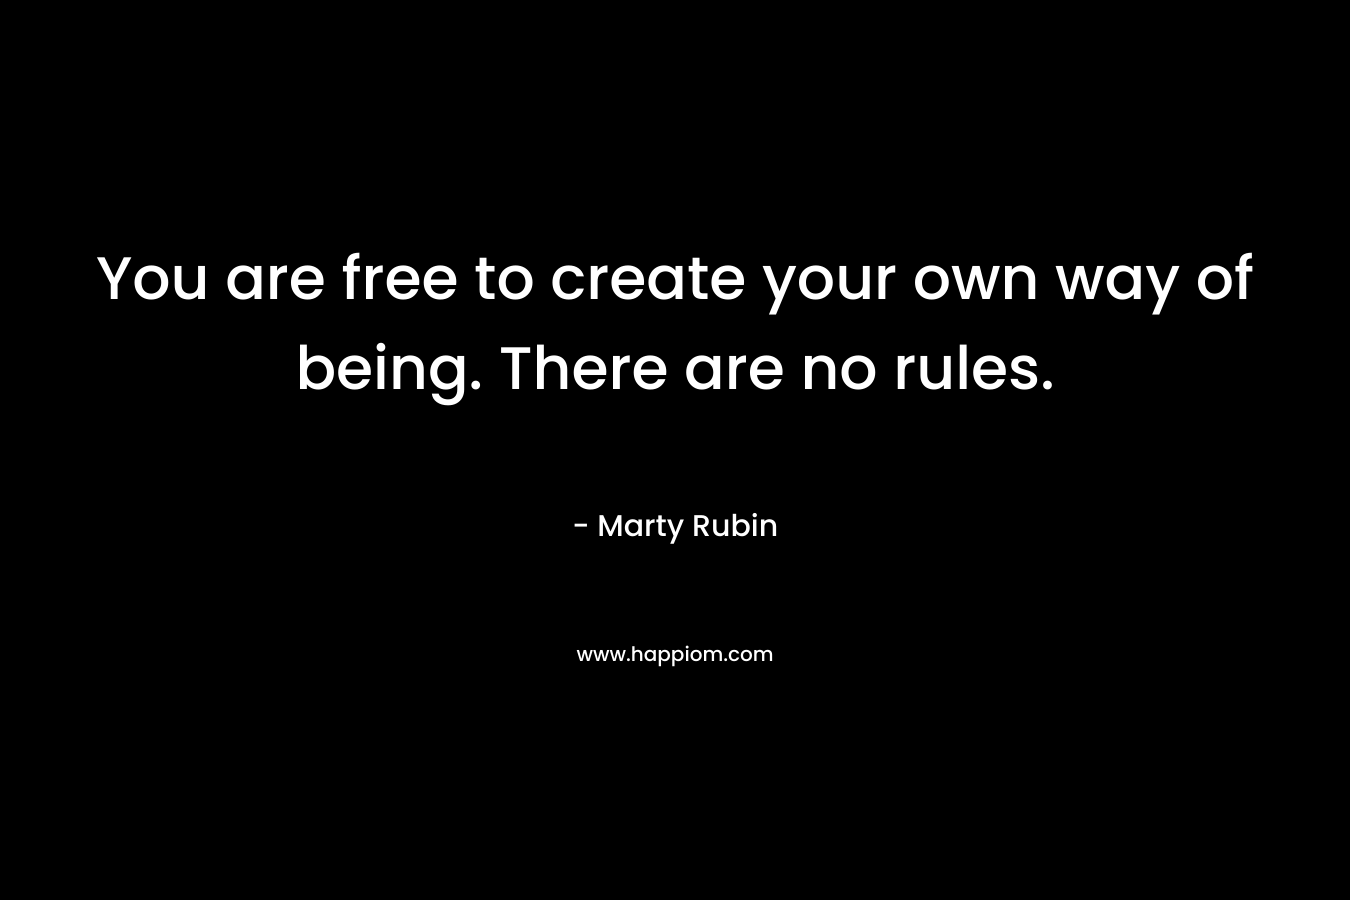 You are free to create your own way of being. There are no rules.